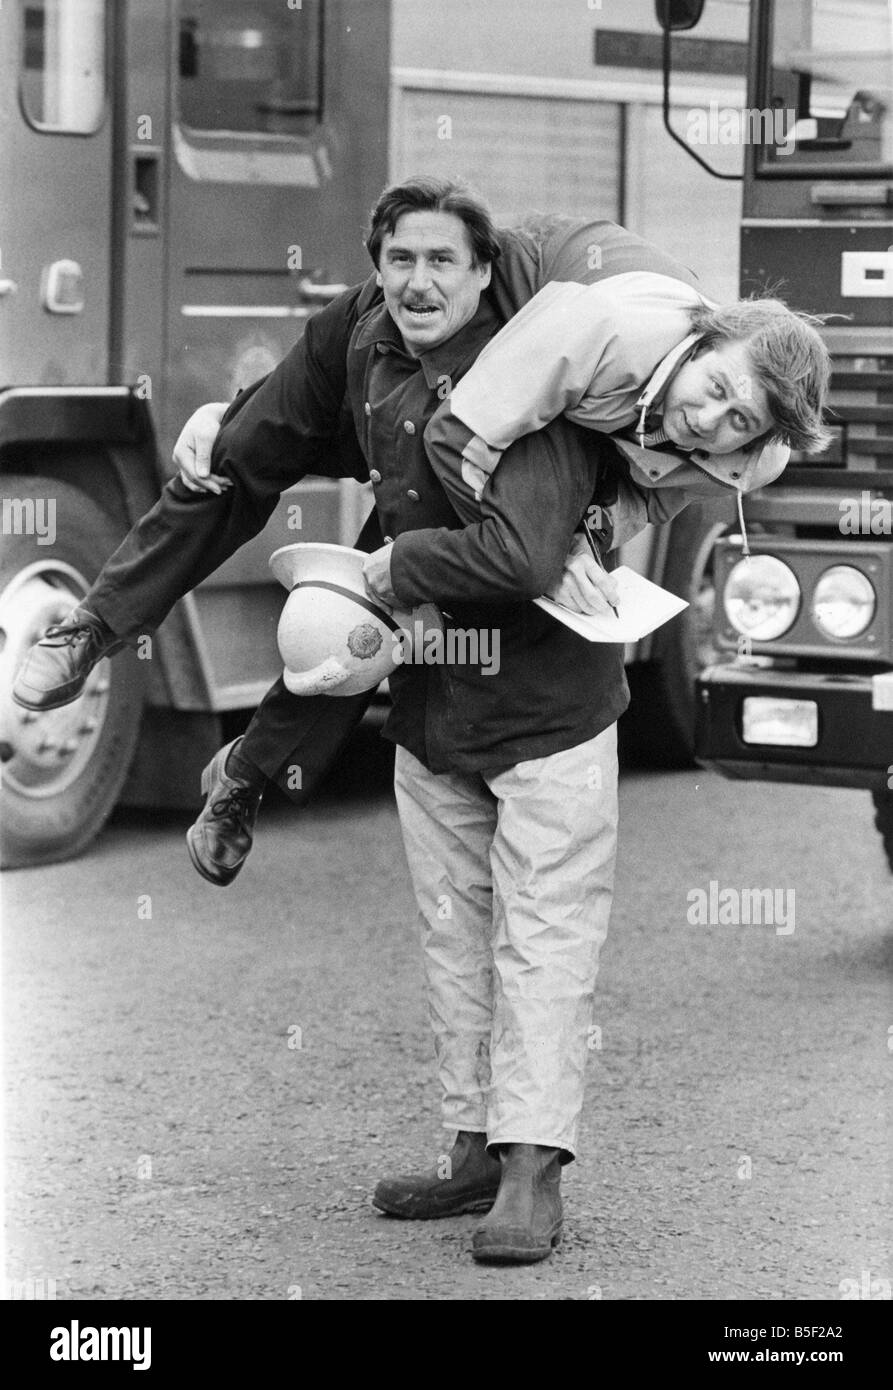 Pouring cold water on the report s claims that firemen are unfit is leading fireman John Kerr who shows there e nothing wrong with his fitness as he gives Chronicle reporter Bill Lothian a fireman s lift Stock Photo